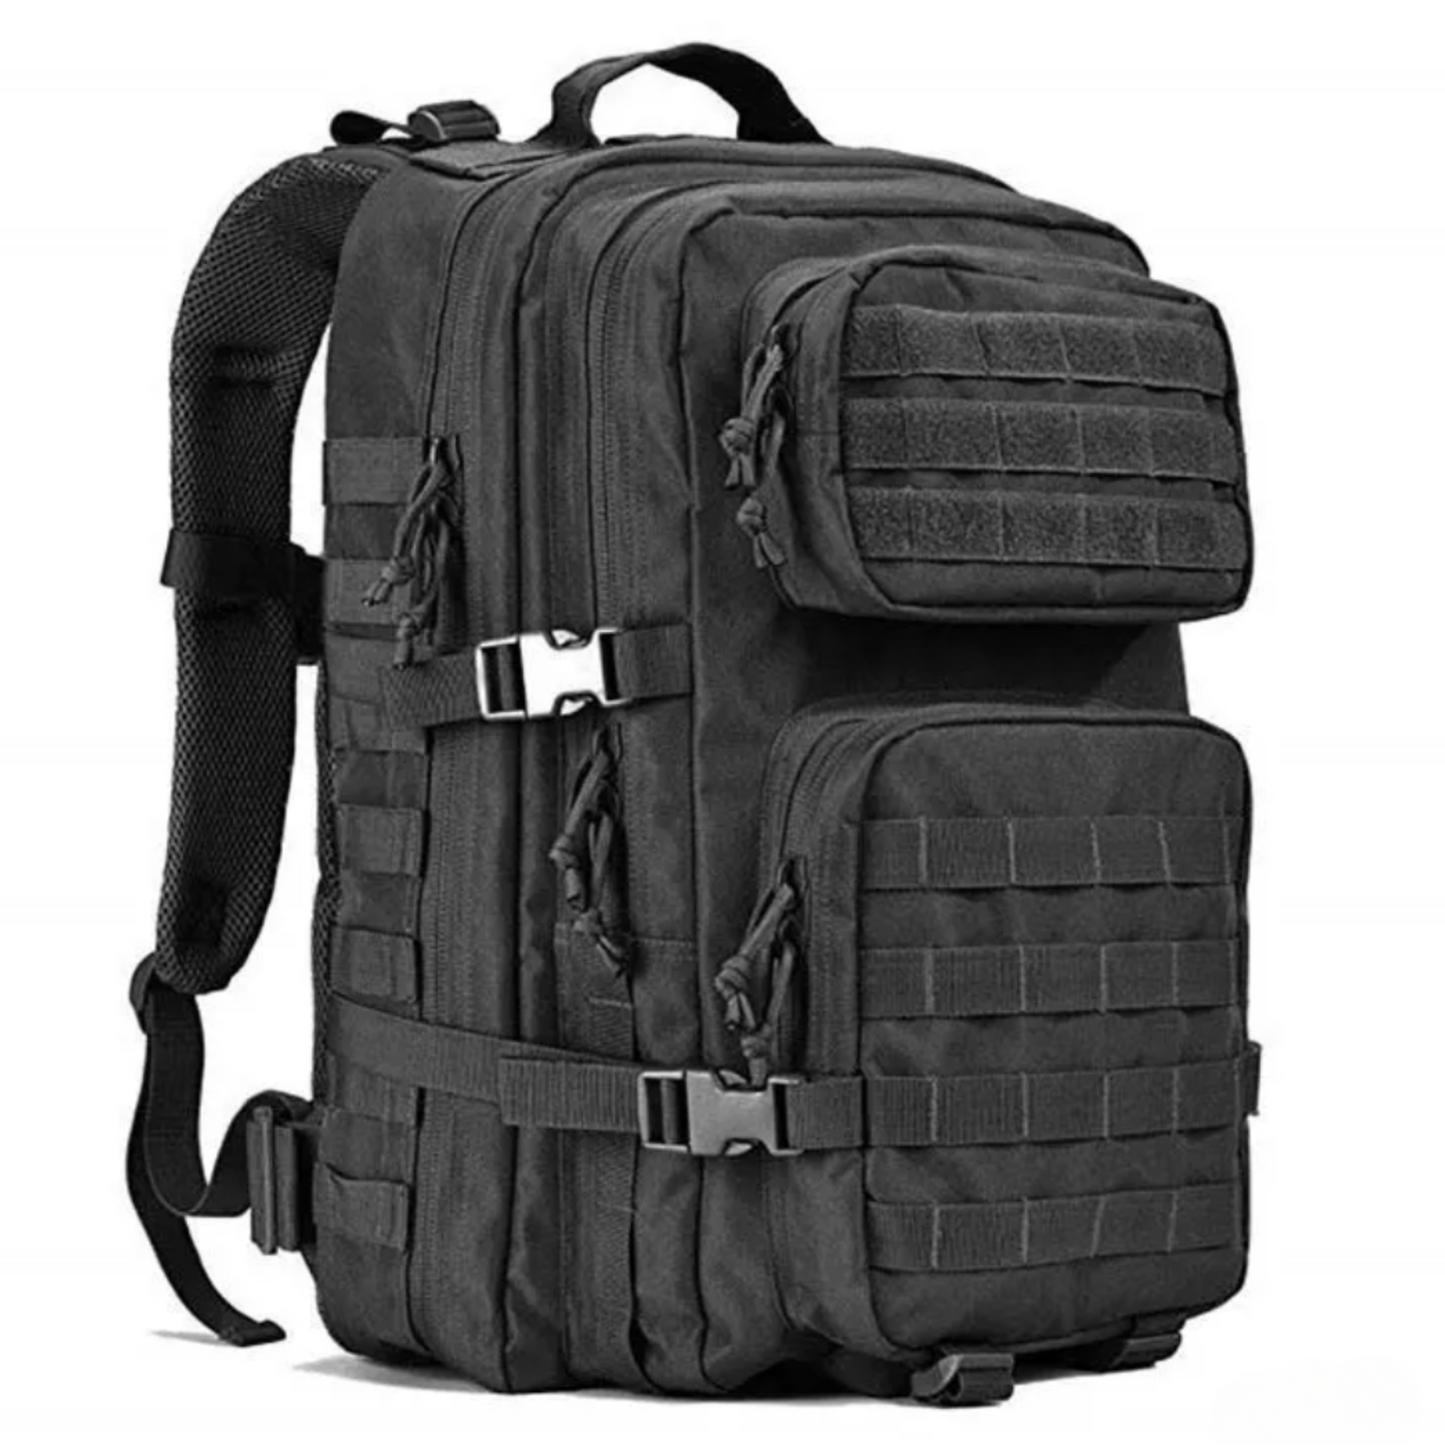 TACTICAL 3-DAY BACKPACK 45L